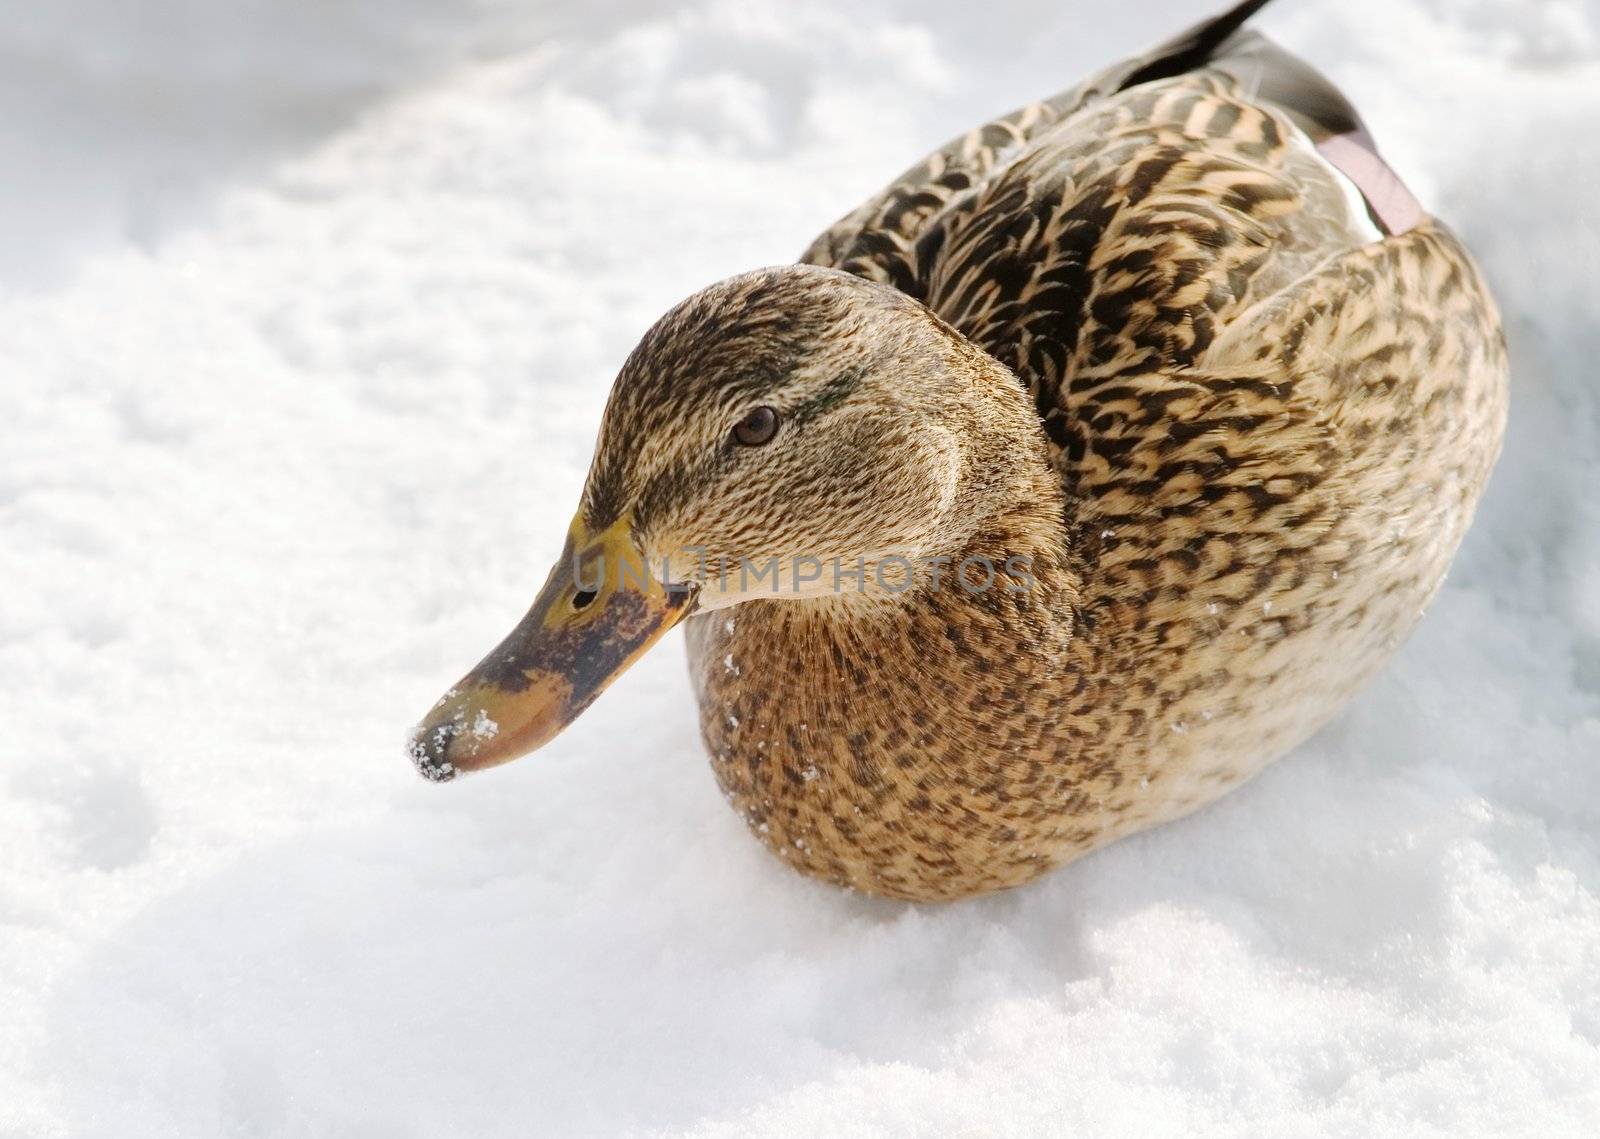 A mallard duck on a background of snow and ice.